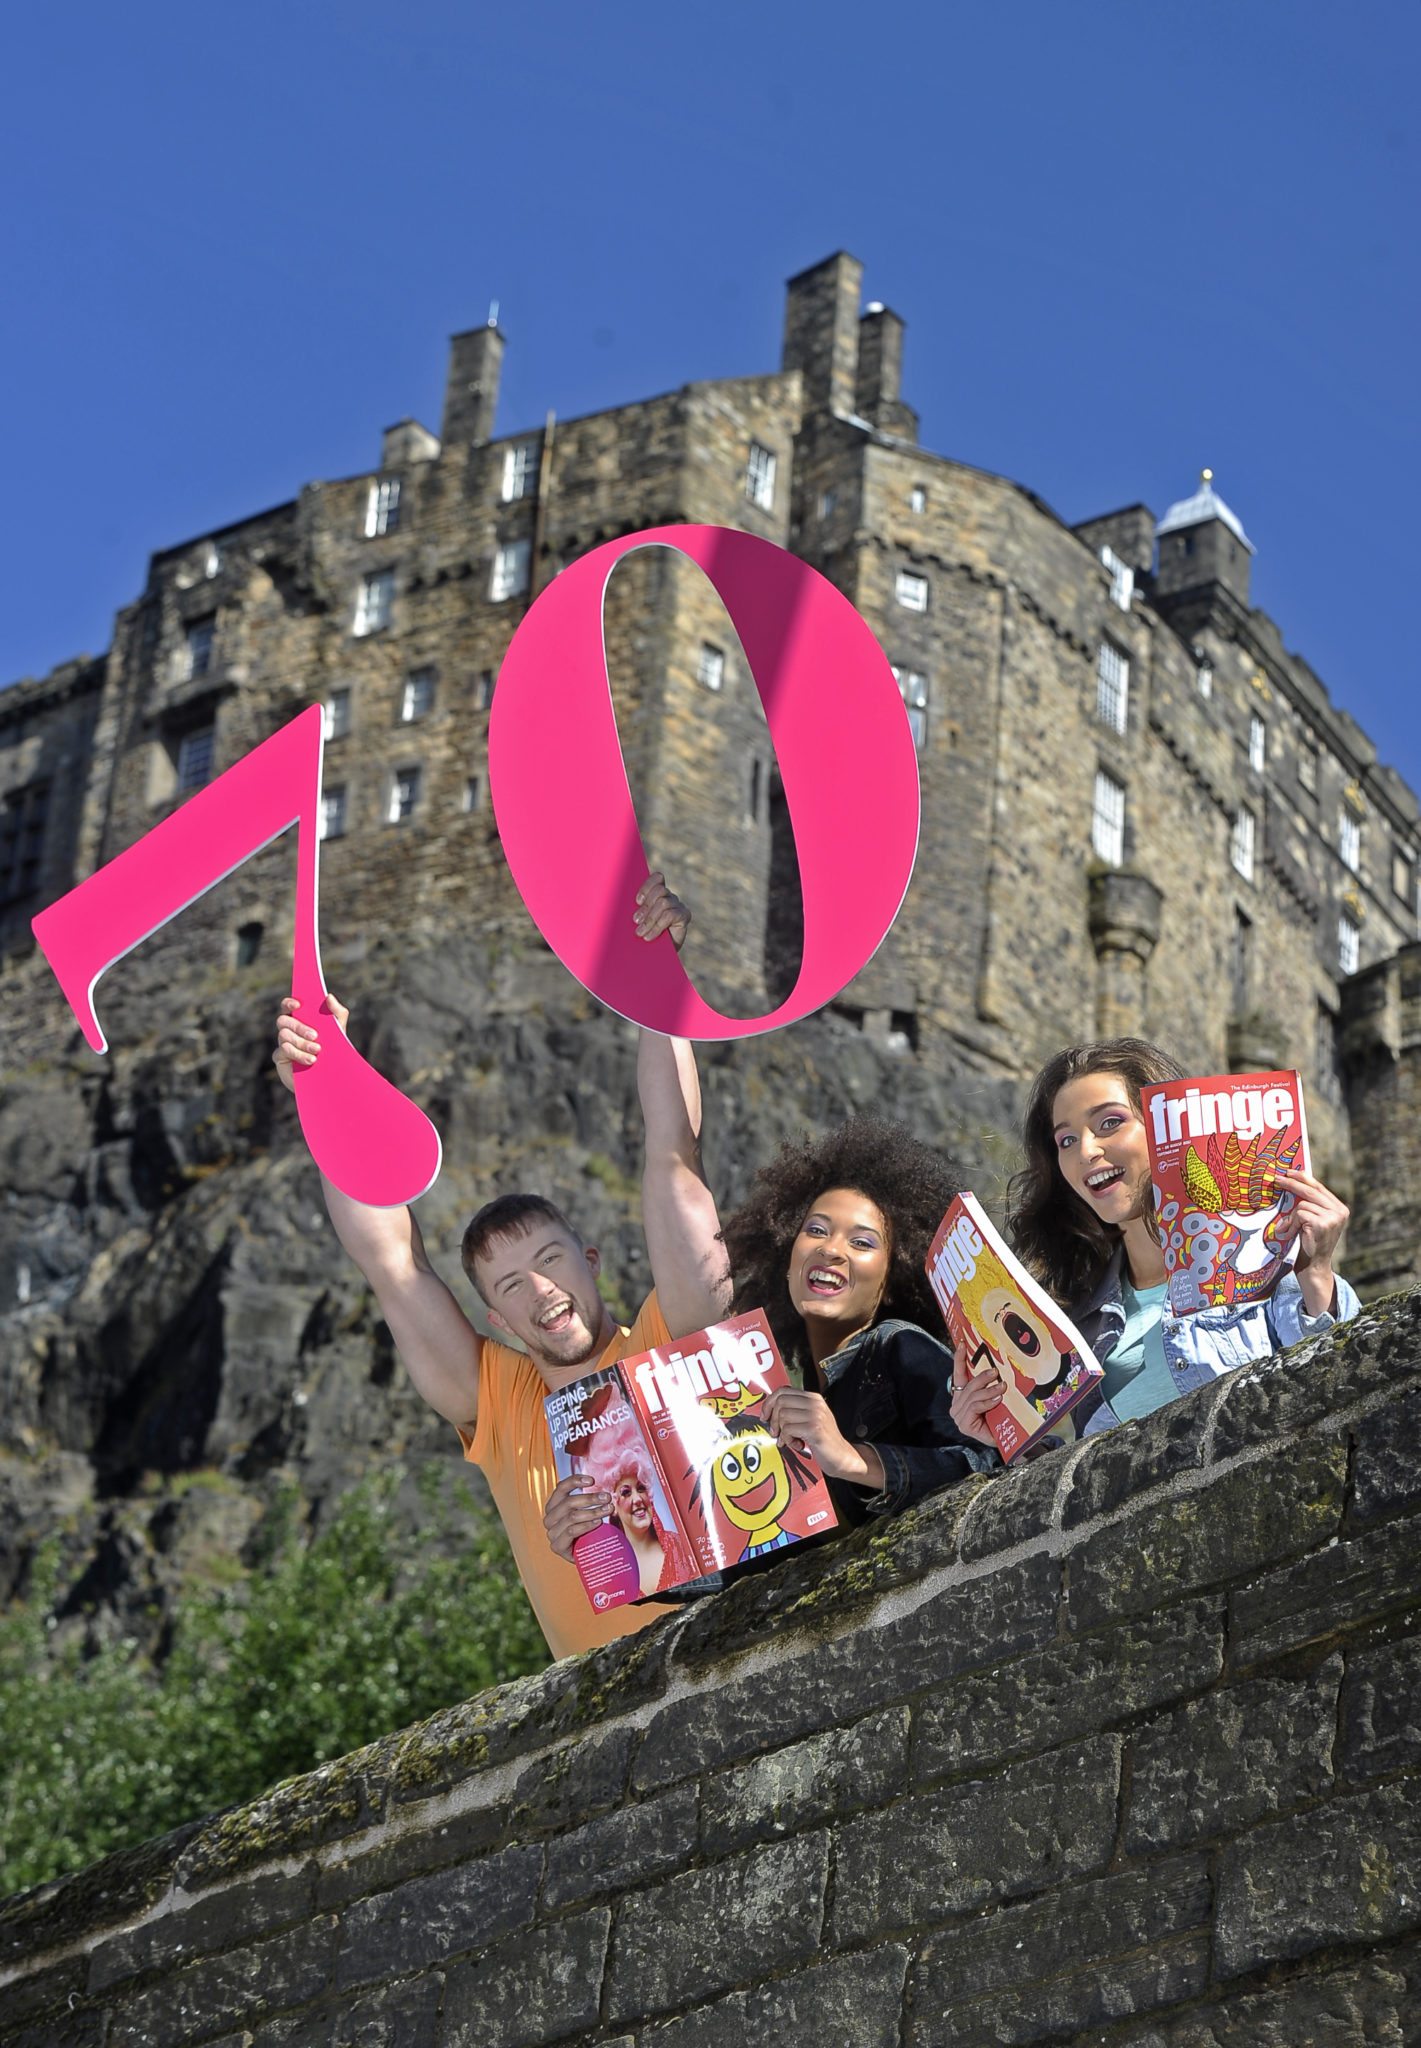 Get the most out of the Edinburgh Festival Fringe